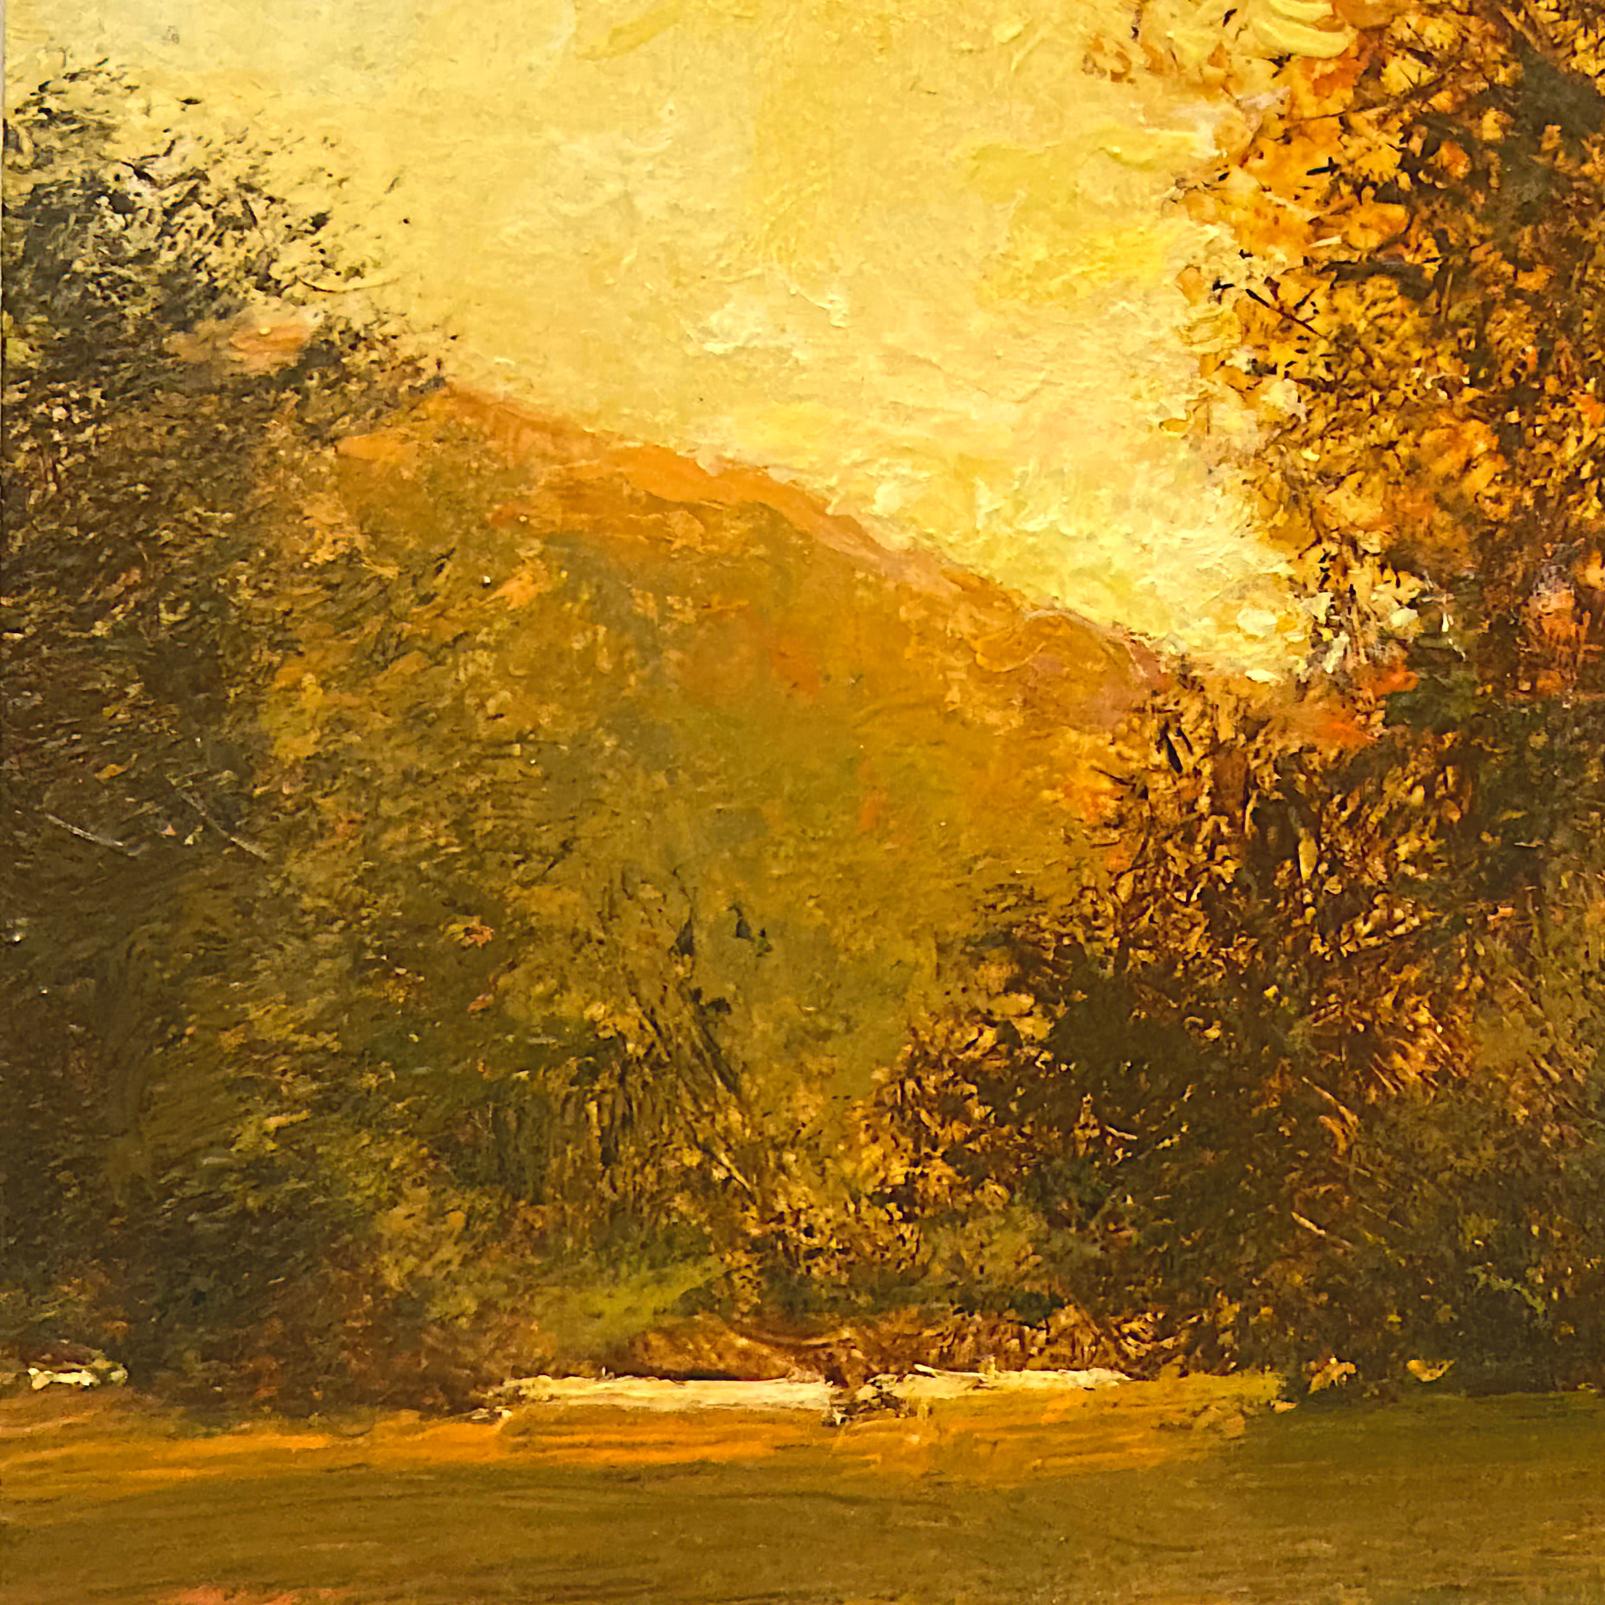 Evening, Original Oil Painting - Brown Figurative Painting by Shawn Krueger